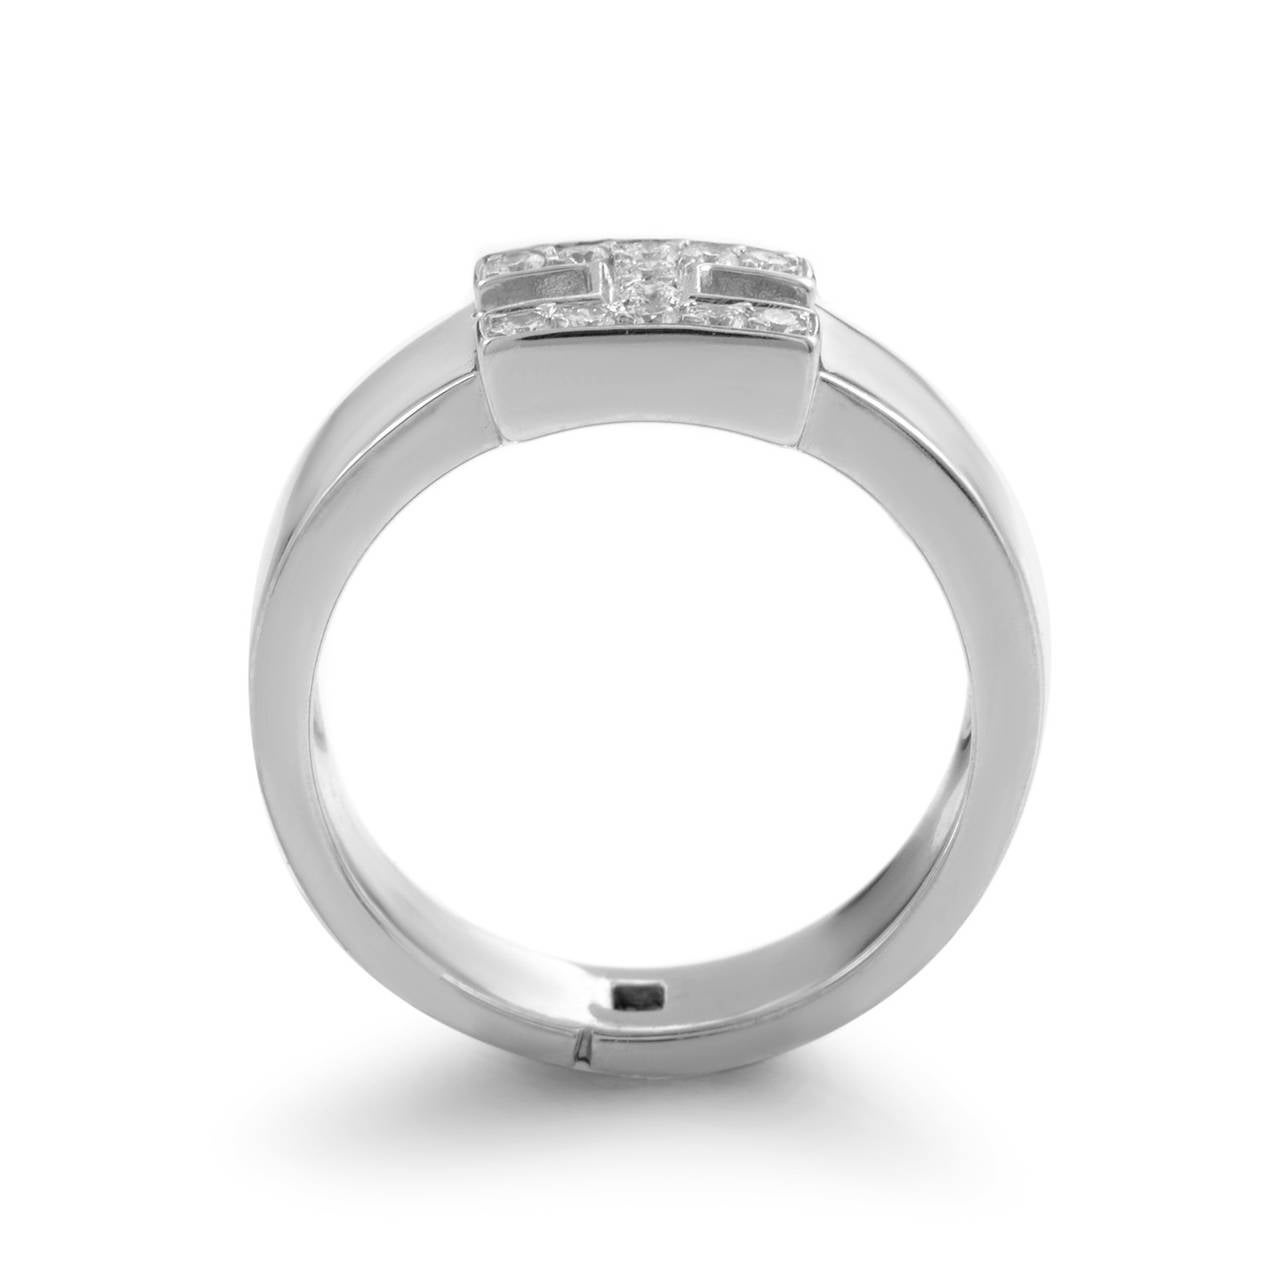 Step out in style with this simple yet elegant 18K white gold ring from Hermès. Its size 5.25 renders it ideal for small and medium fingers and makes for a snug and comfortable wear. Lastly, the ring is adorned with a diamond-set 